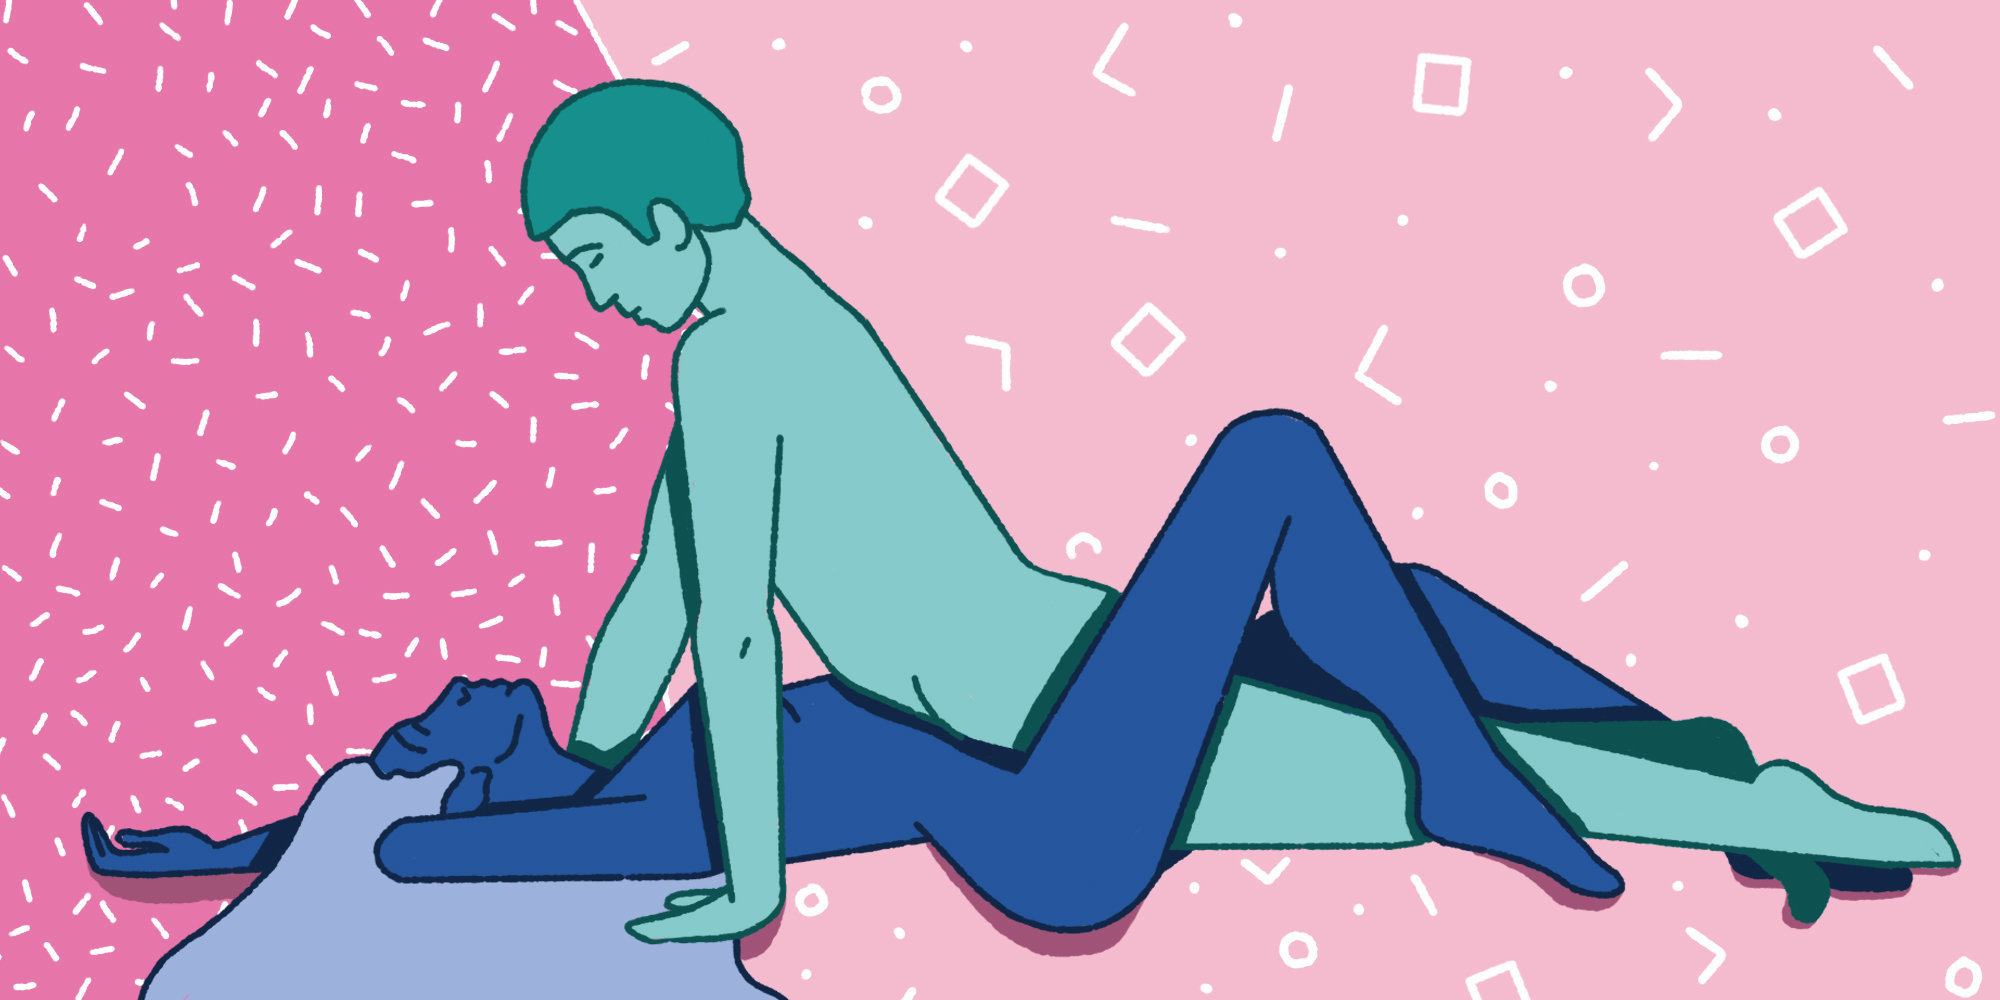 Illustration of two people in an intimate pose, expressing connection and romance